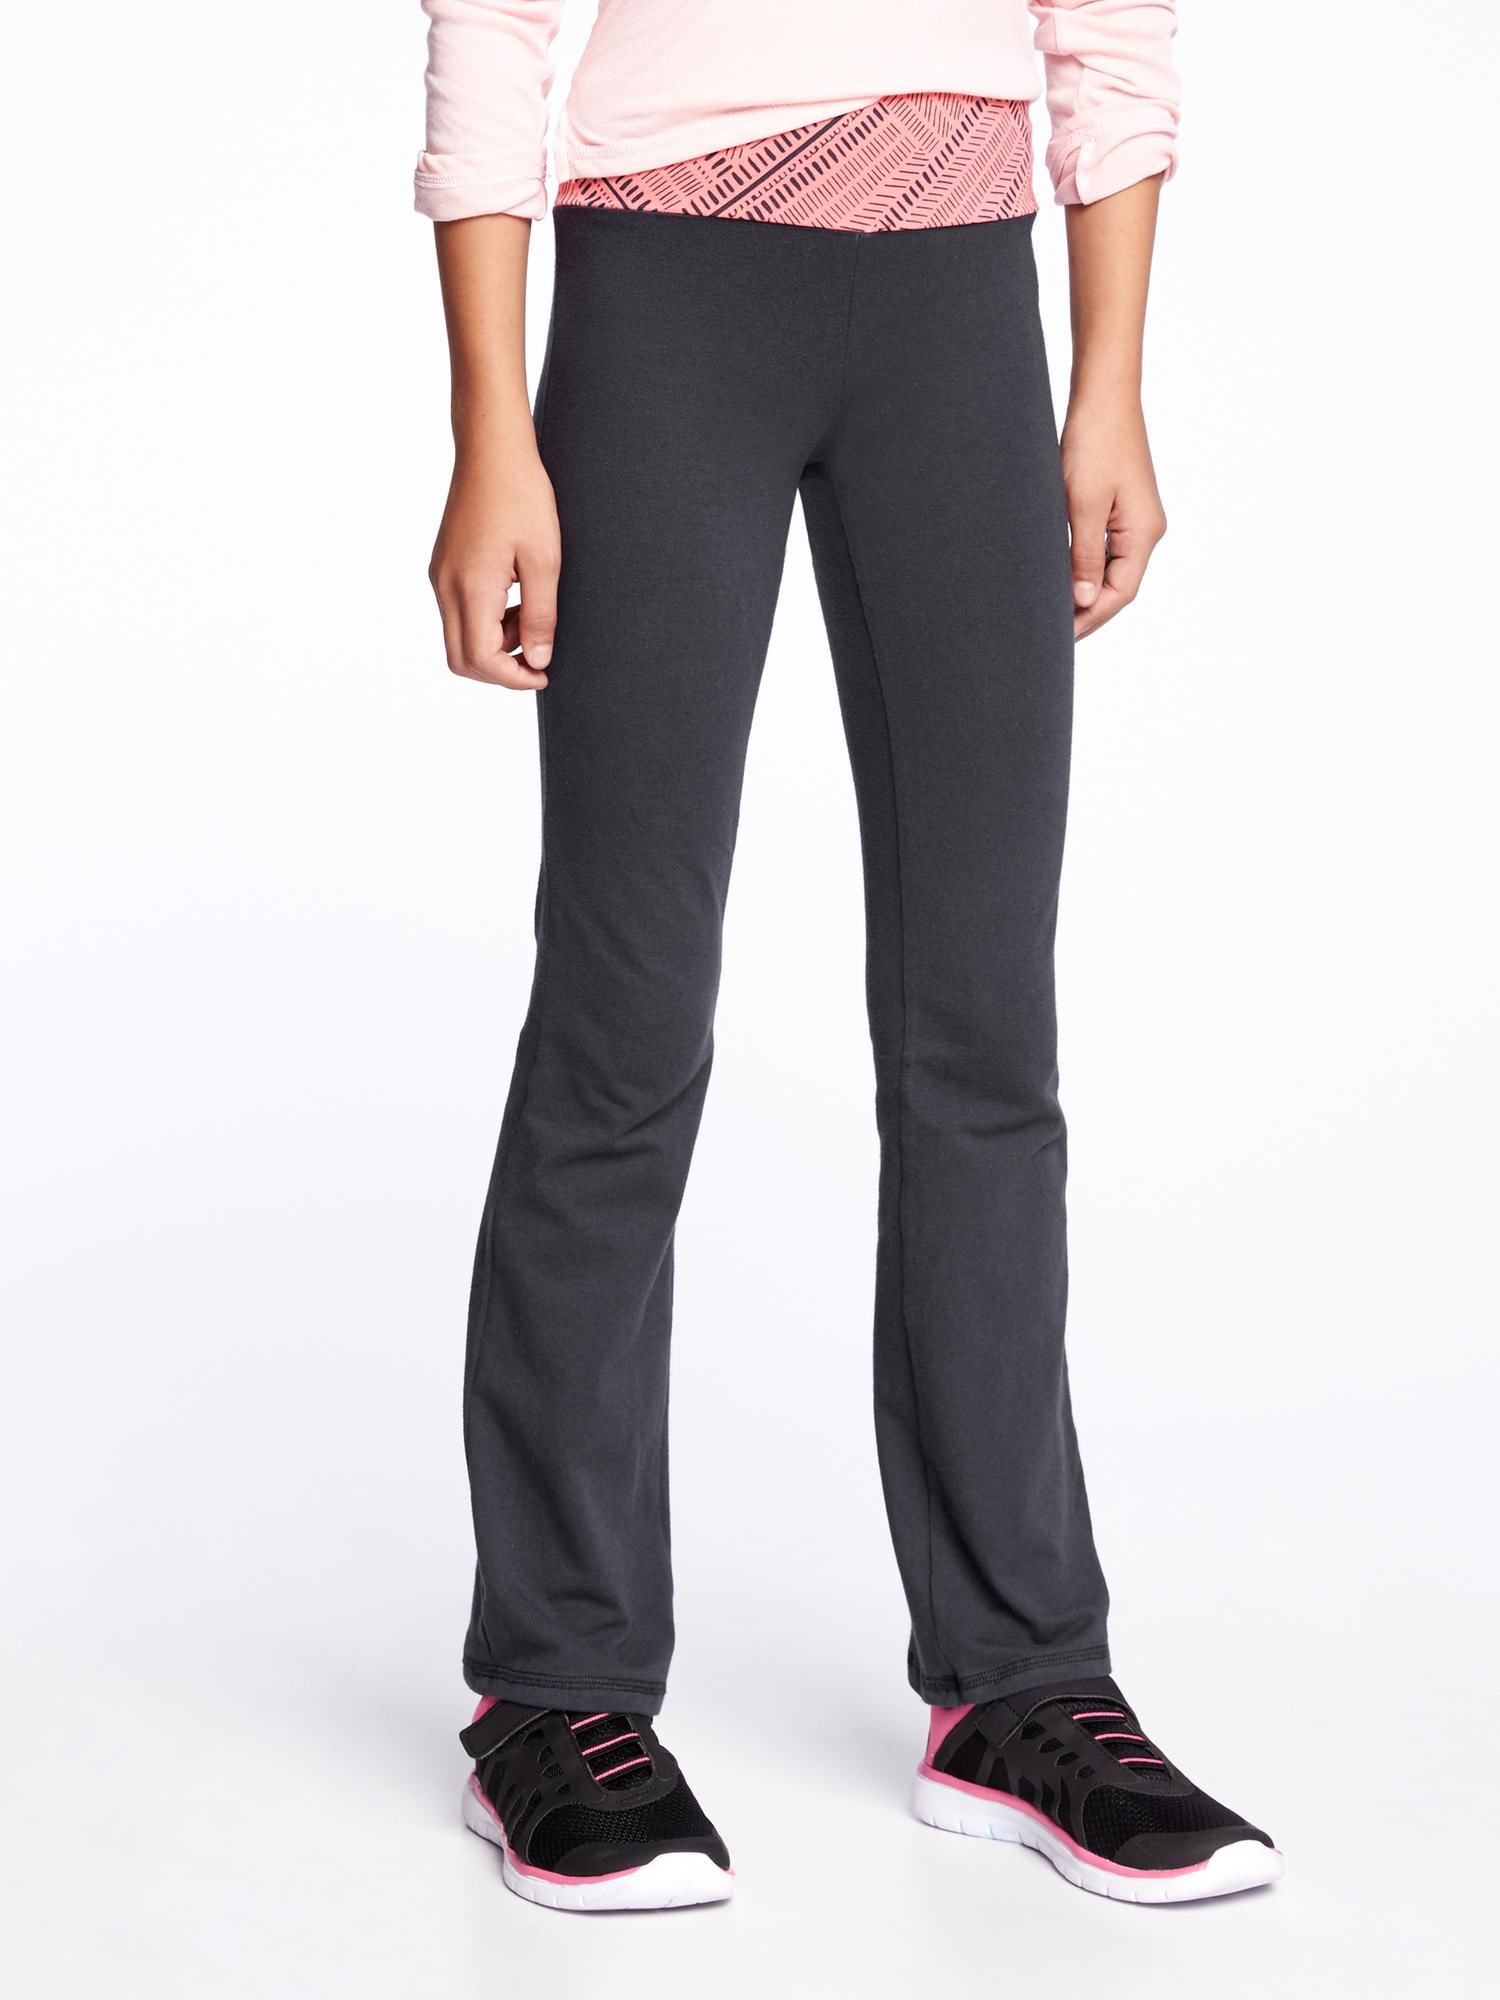 Fitted Performance Yoga Pants for Girls